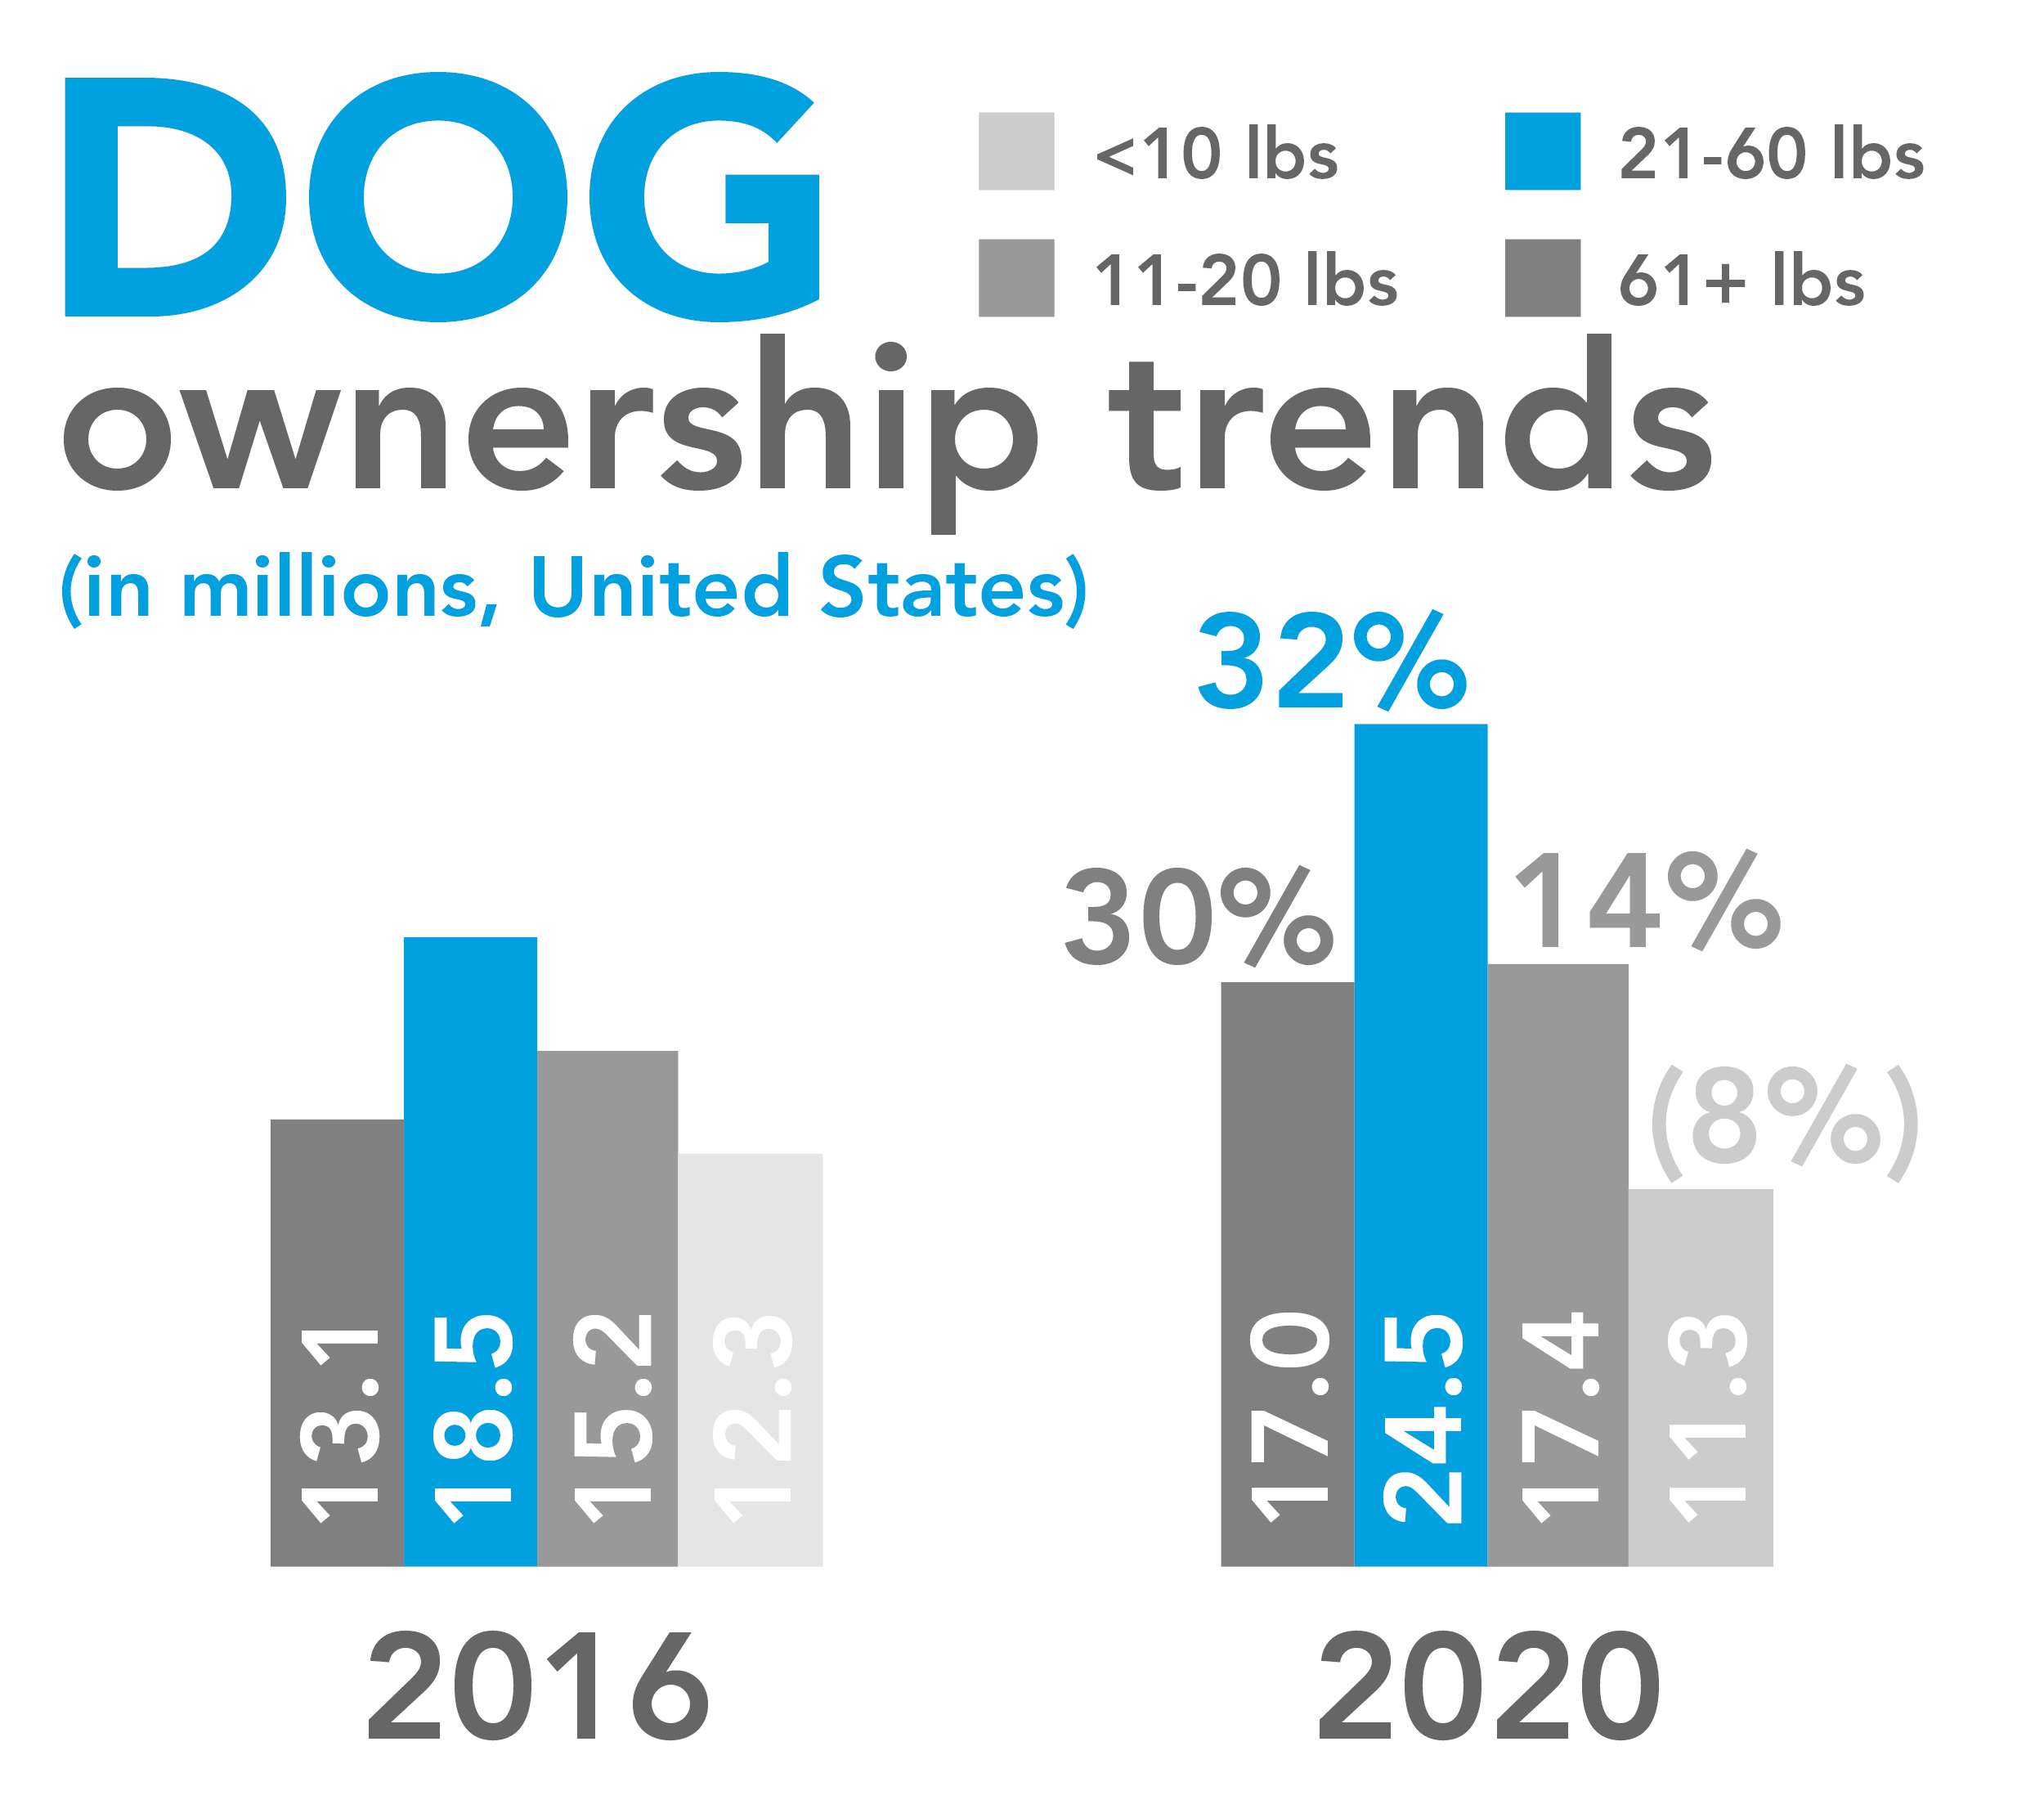 Dog ownership trends show more households with medium and large dogs, less with smaller dogs (Packaged Facts)